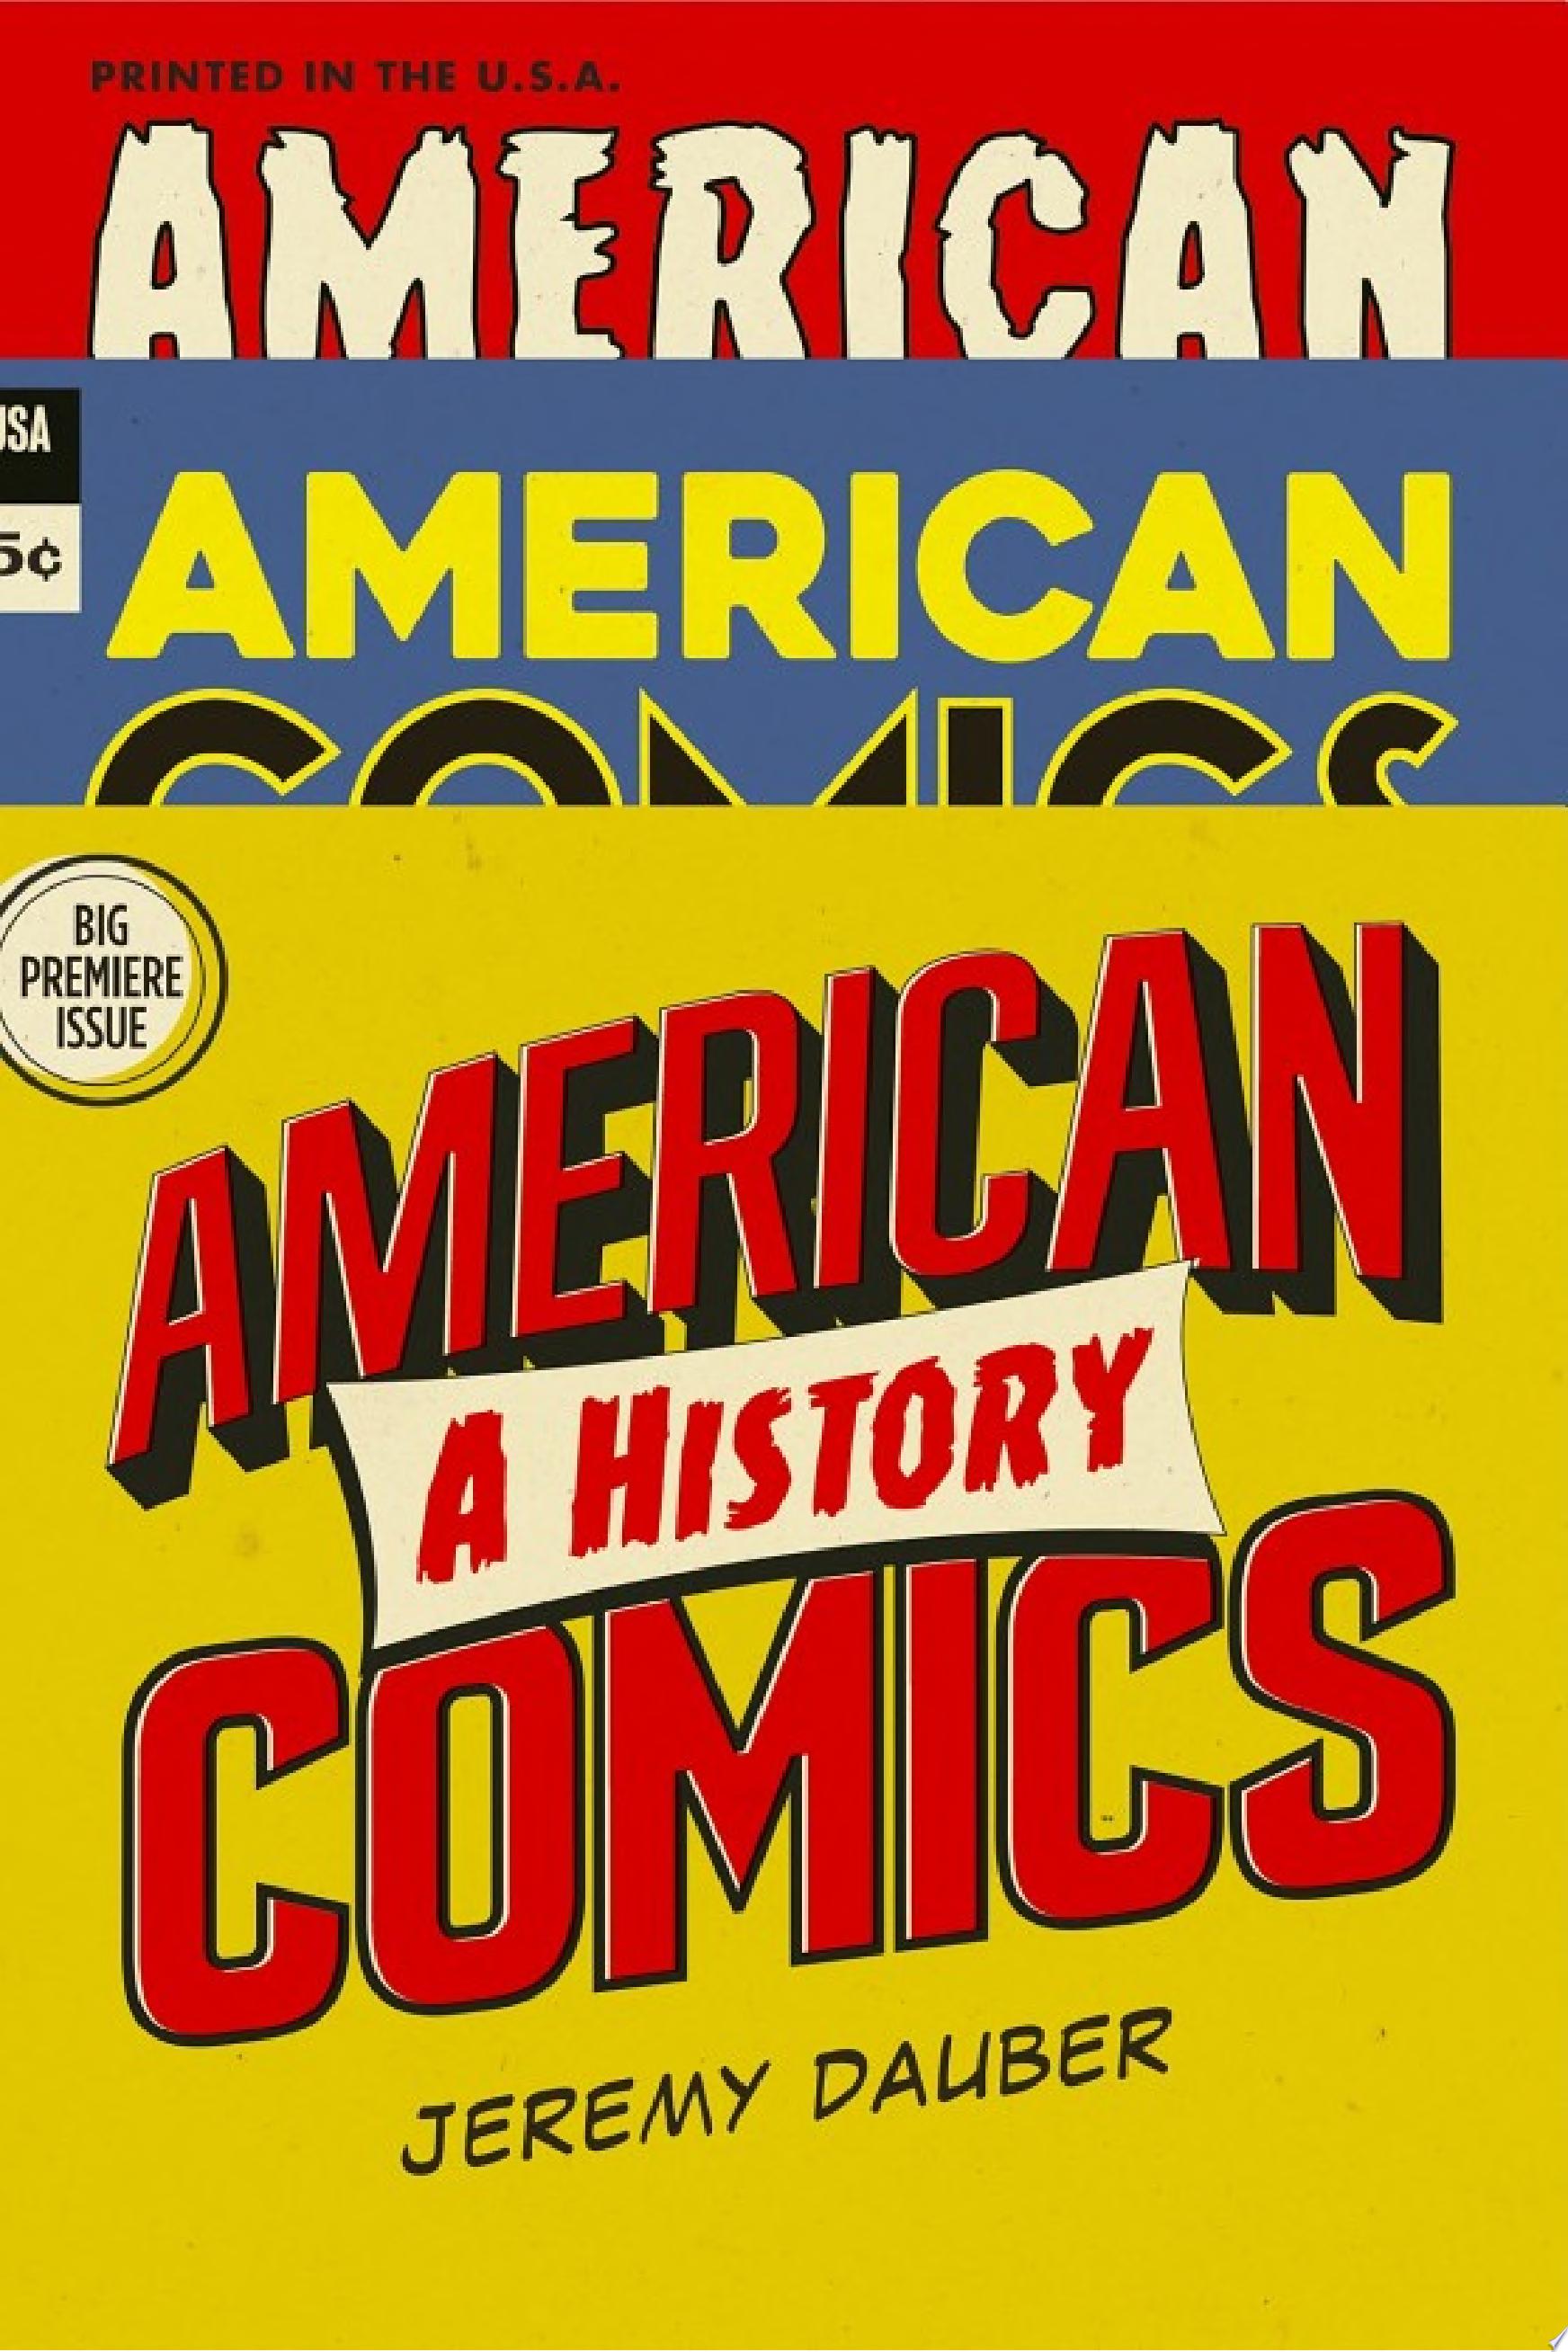 Image for "American Comics: A History"